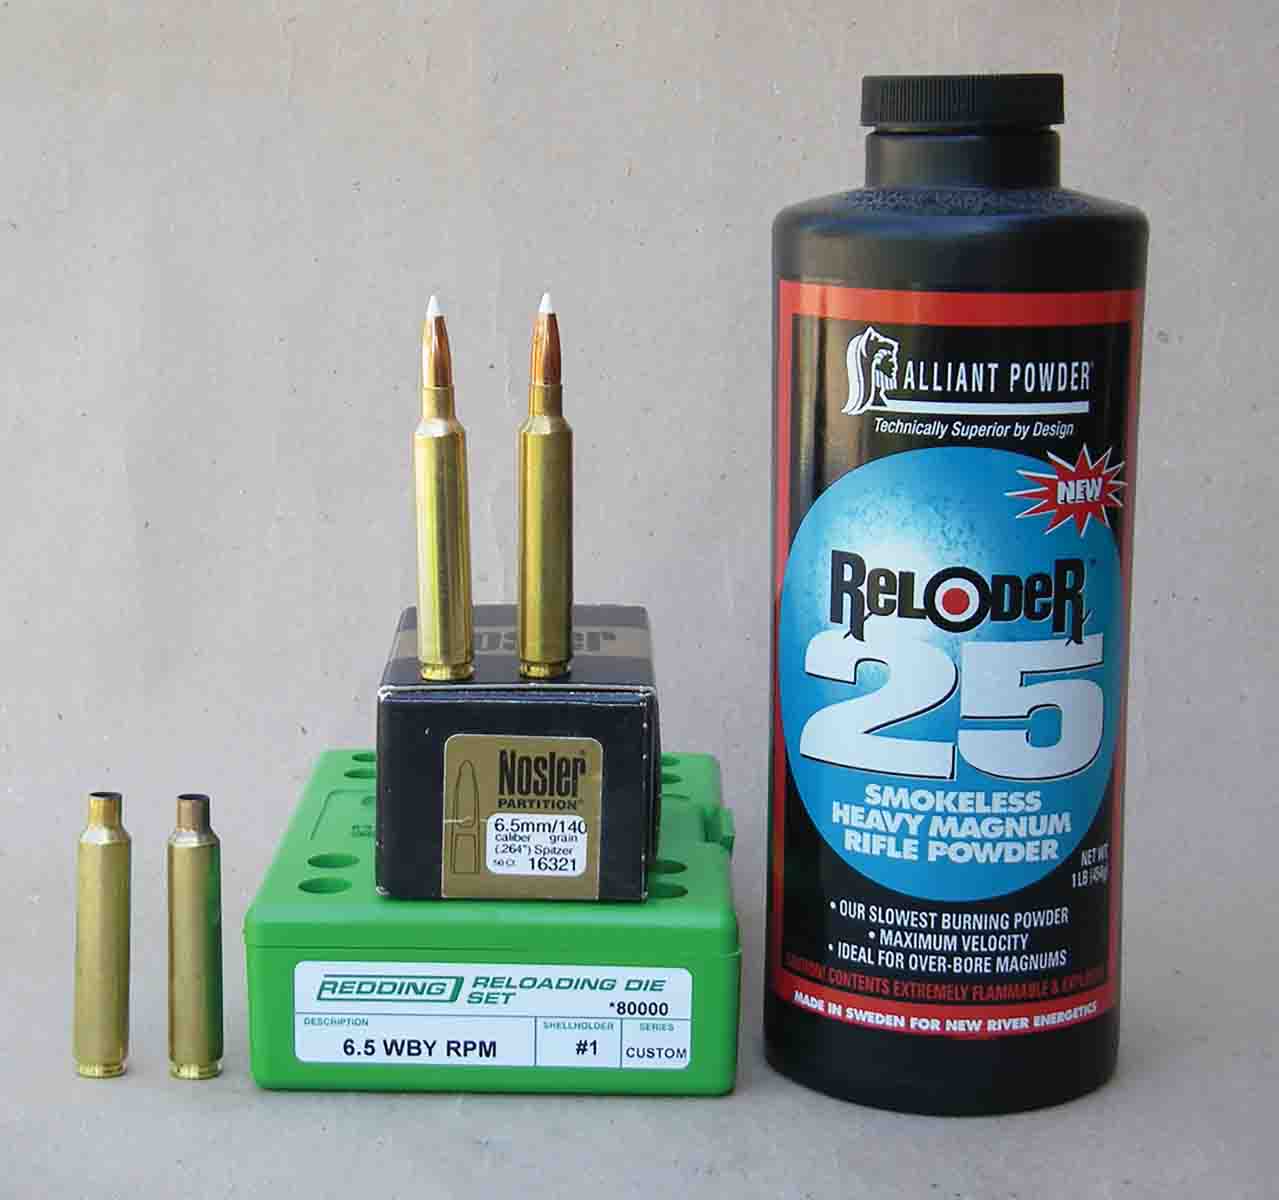 Alliant Reloder 25 is an excellent powder choice when handloading the 6.5 Weatherby RPM with 140-grain bullets.